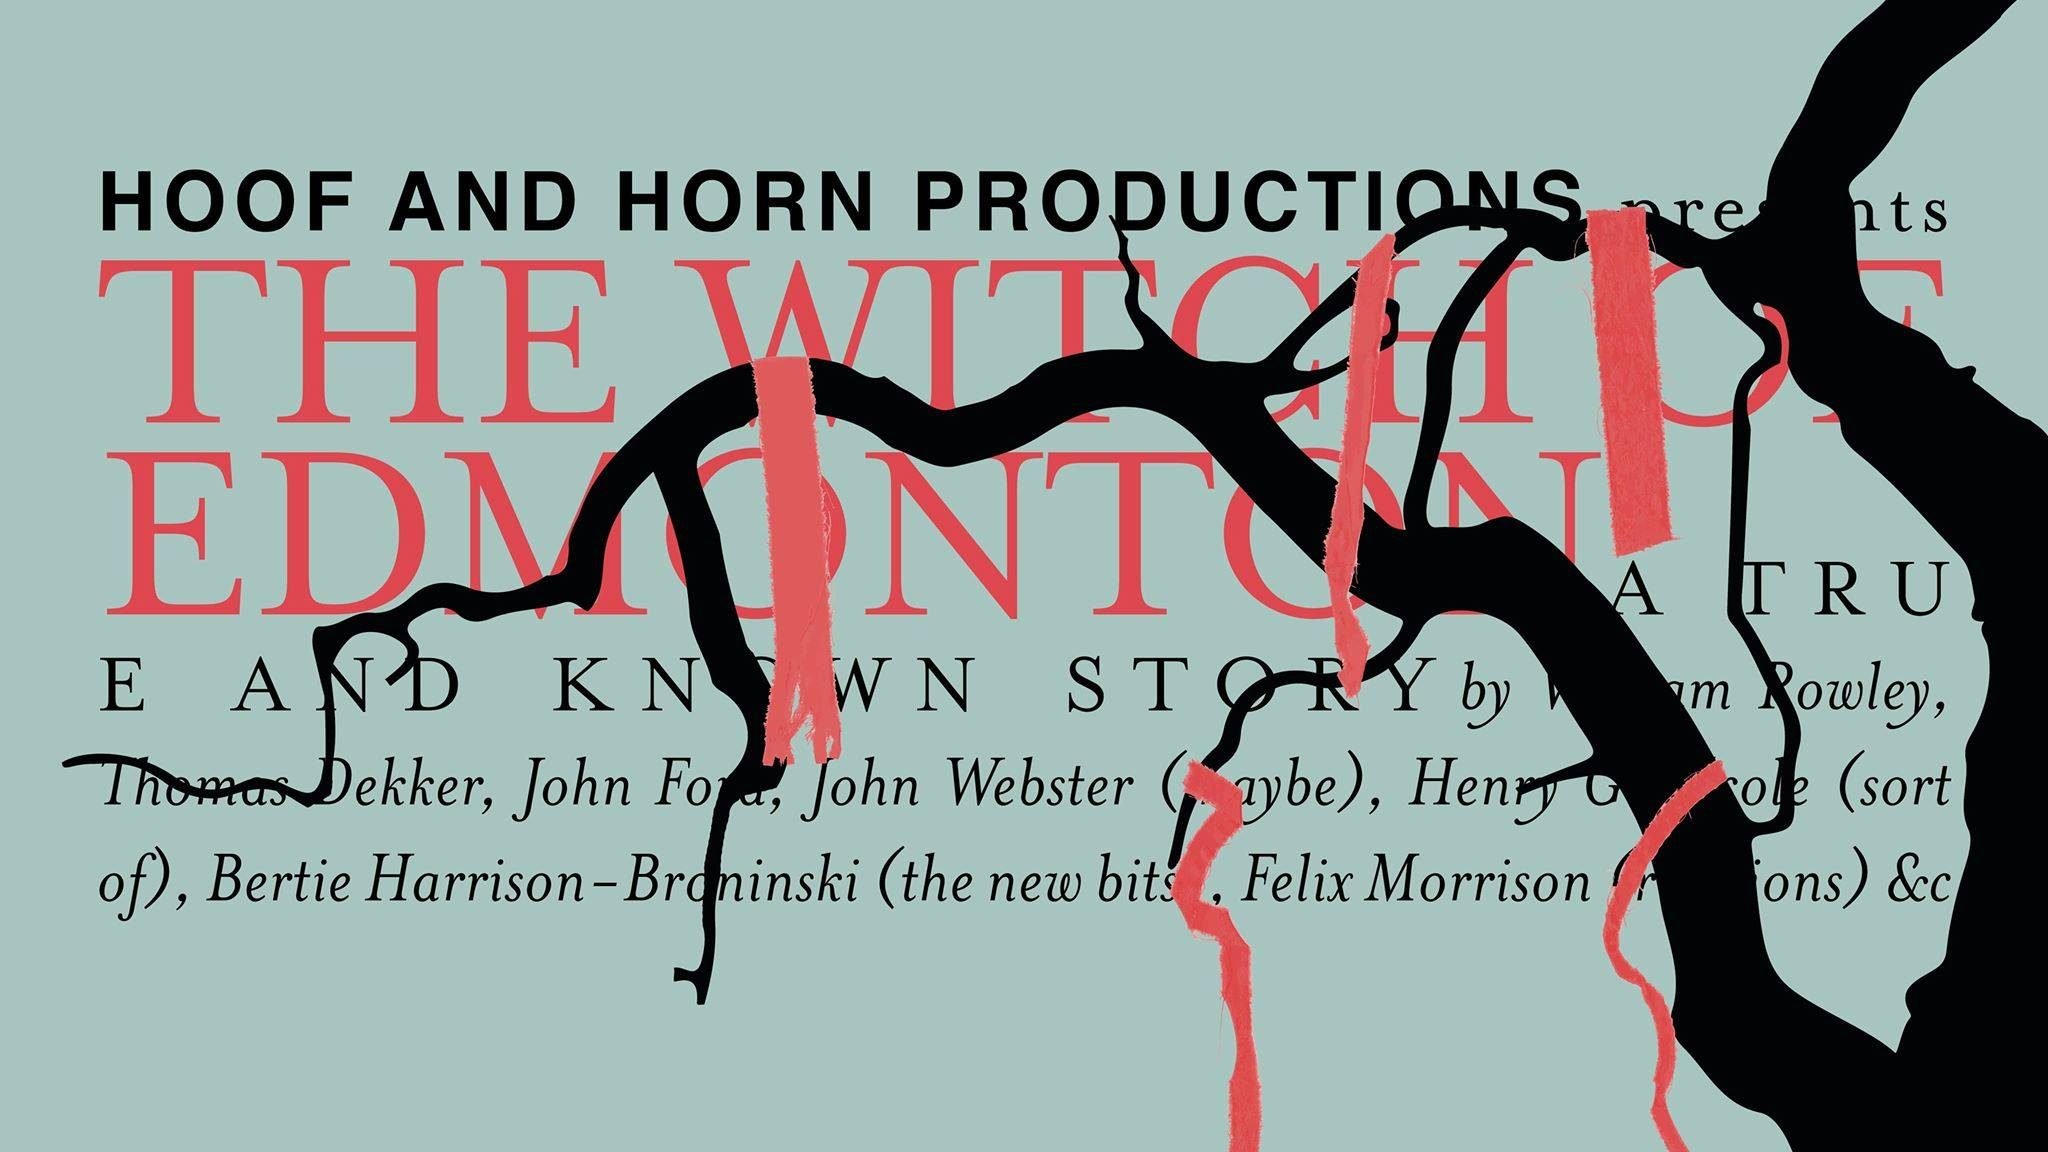 The words 'Hoof and Horn Productions, The Witch of Edmonton' are superimposed on a green background, as well as the names of the writers/directors of the play. A black silhouette of a tree intertwines with the words